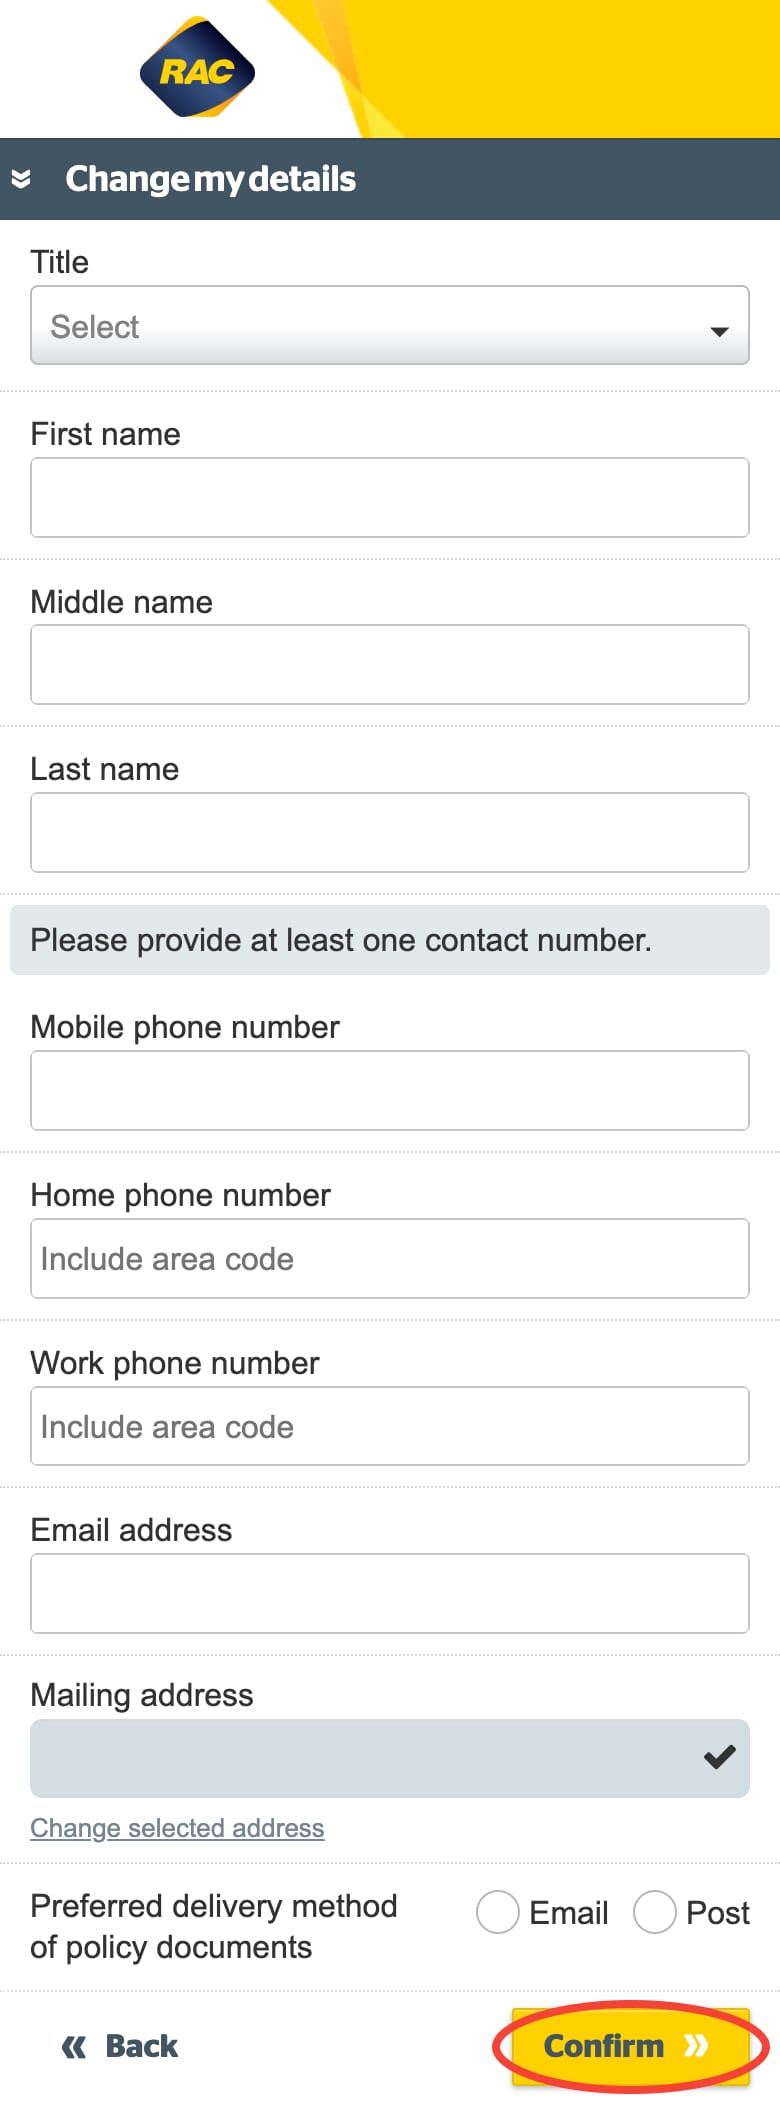 Update your contact details on Mobile